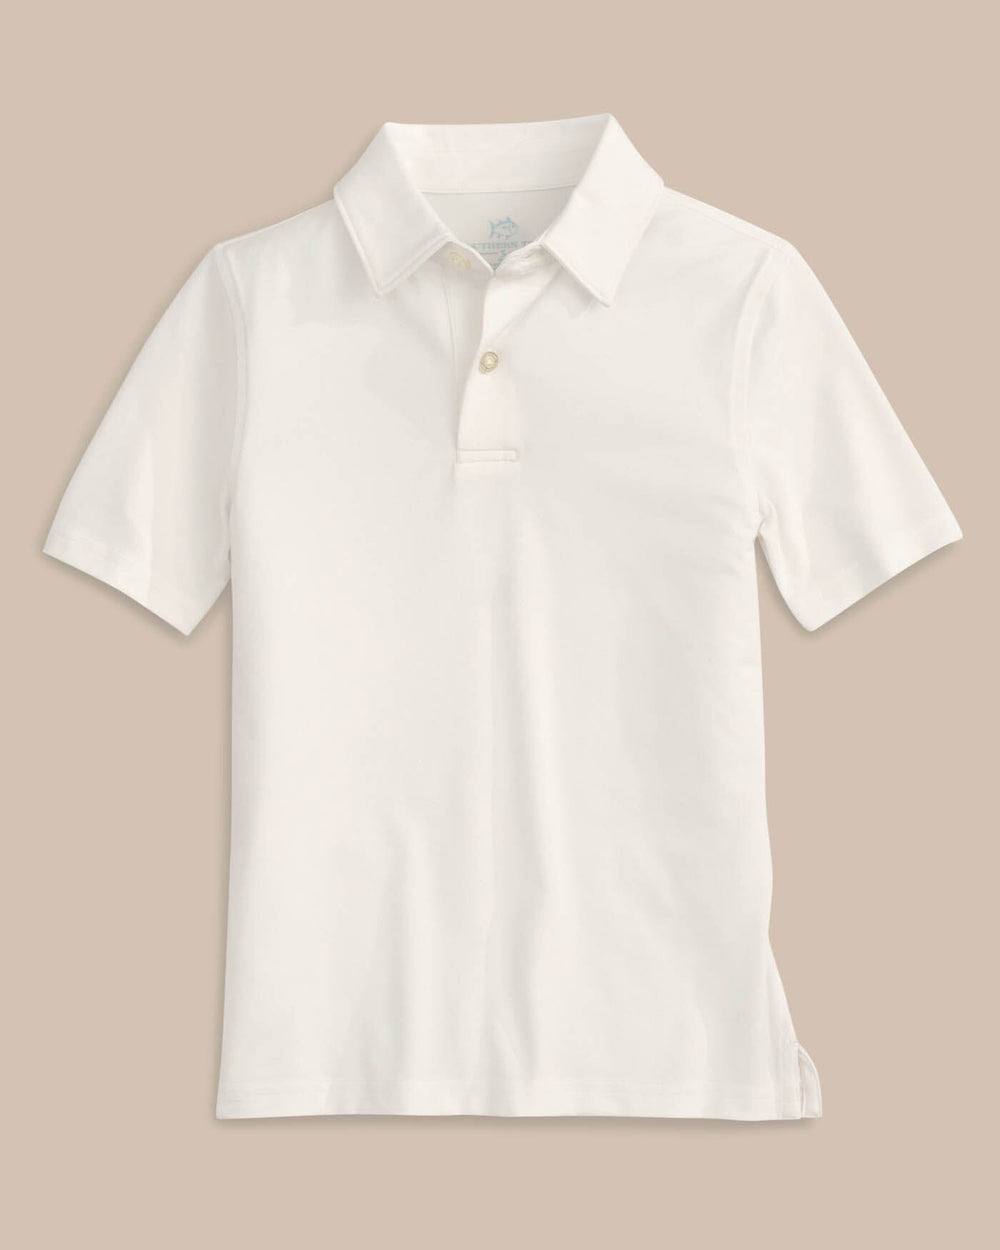 The front view of the Boys Driver Performance Polo Shirt by Southern Tide - Classic White